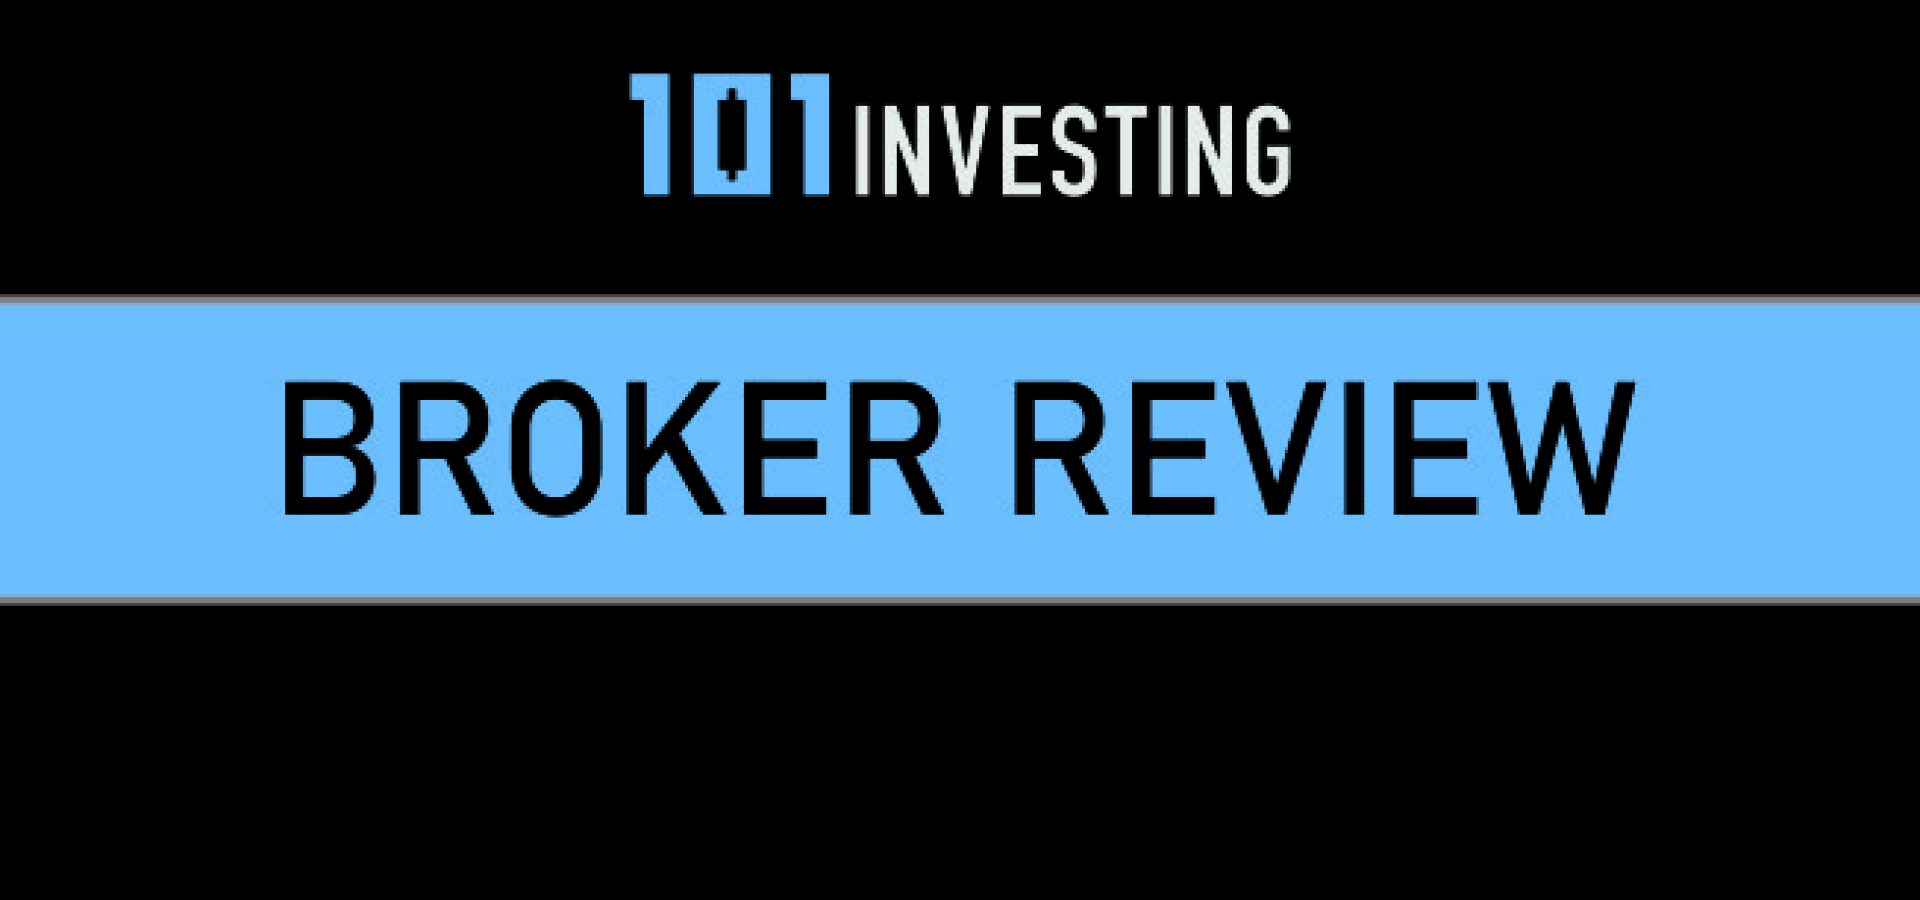 101investing Review